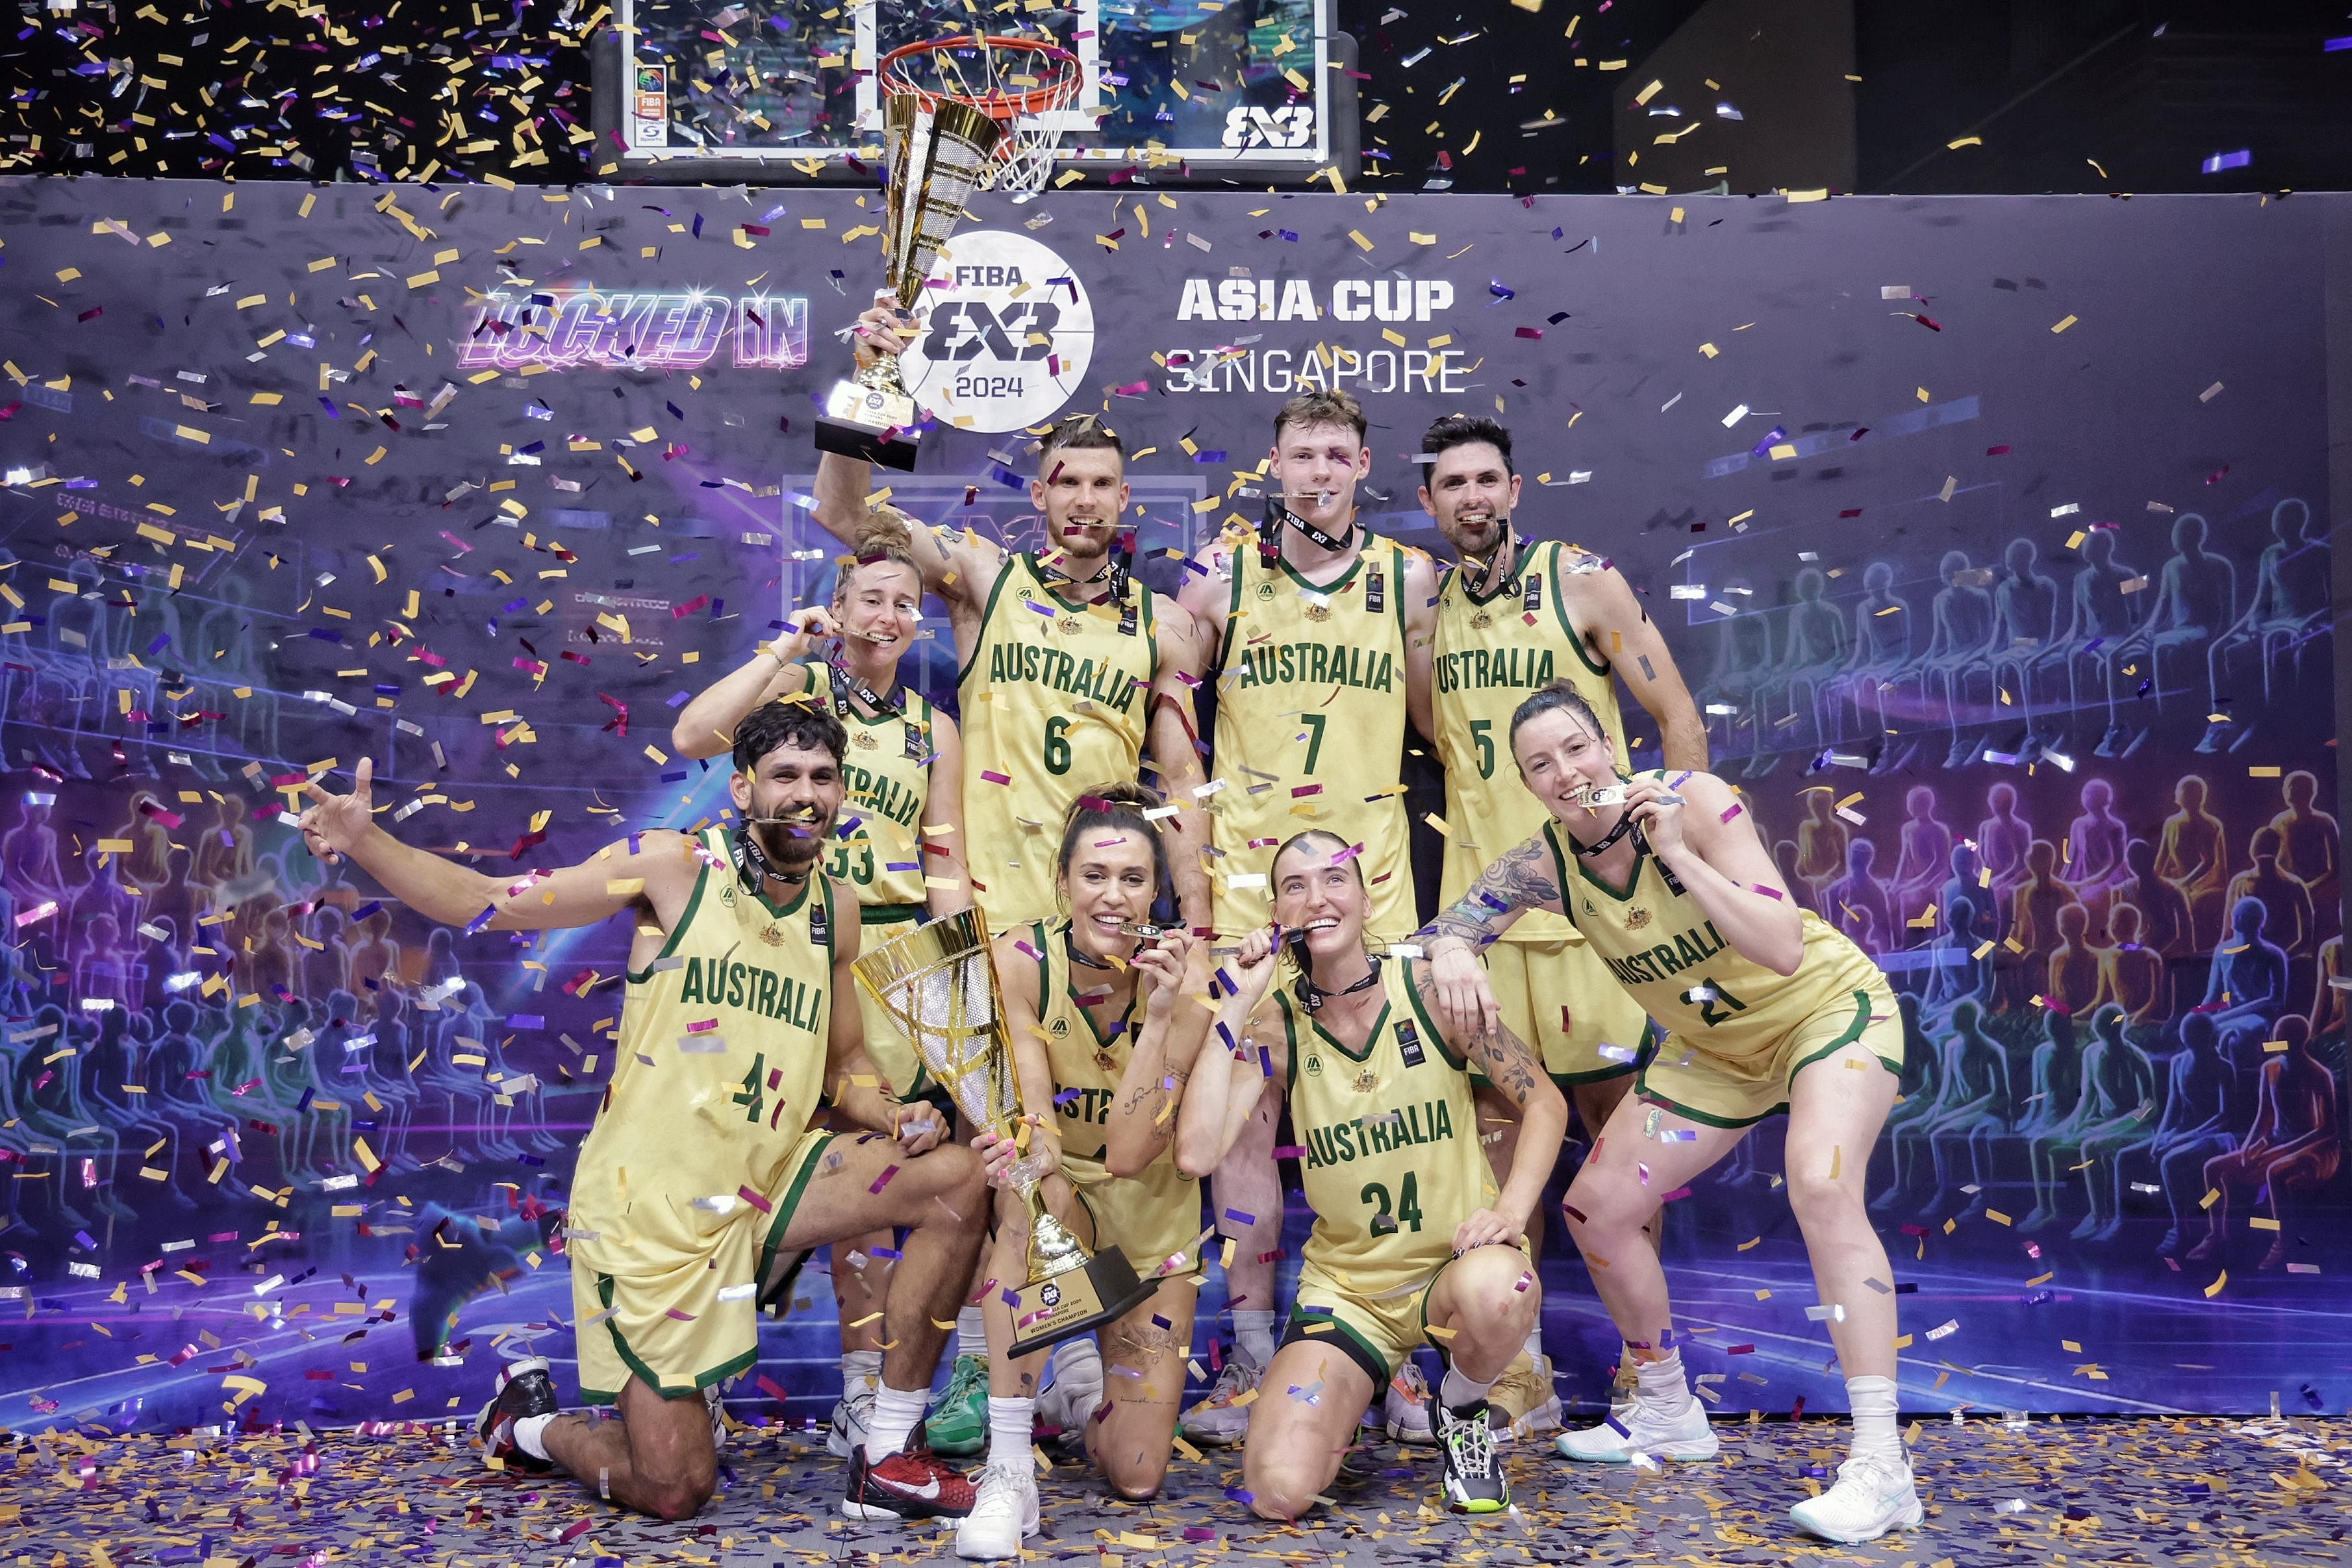 Double delight for Australian men’s and women’s teams at Fiba 3x3 Asia Cup